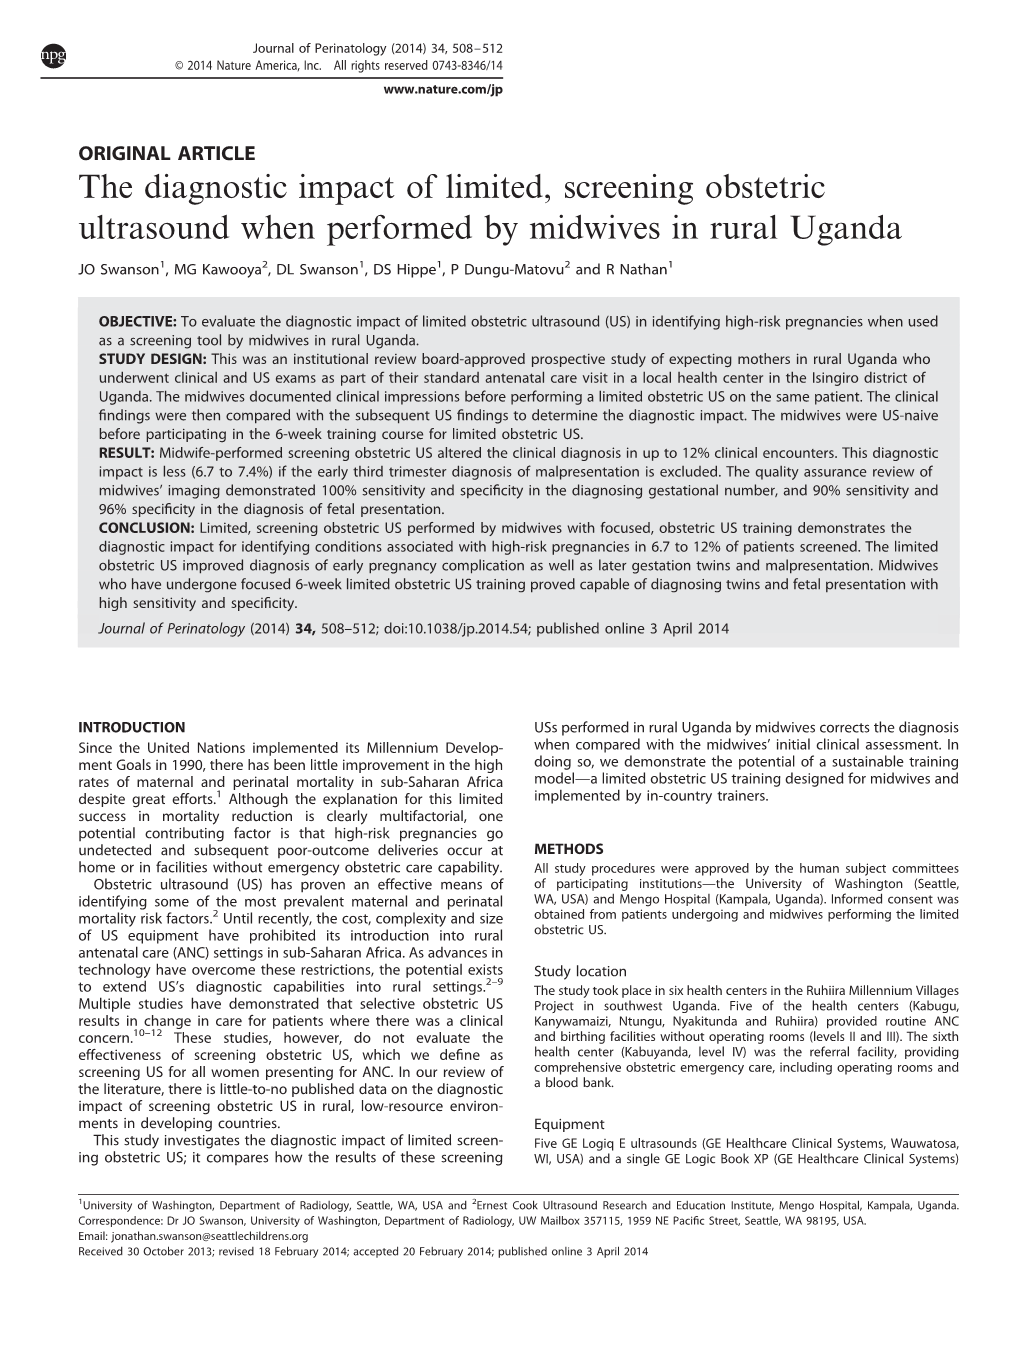 The Diagnostic Impact of Limited, Screening Obstetric Ultrasound When Performed by Midwives in Rural Uganda